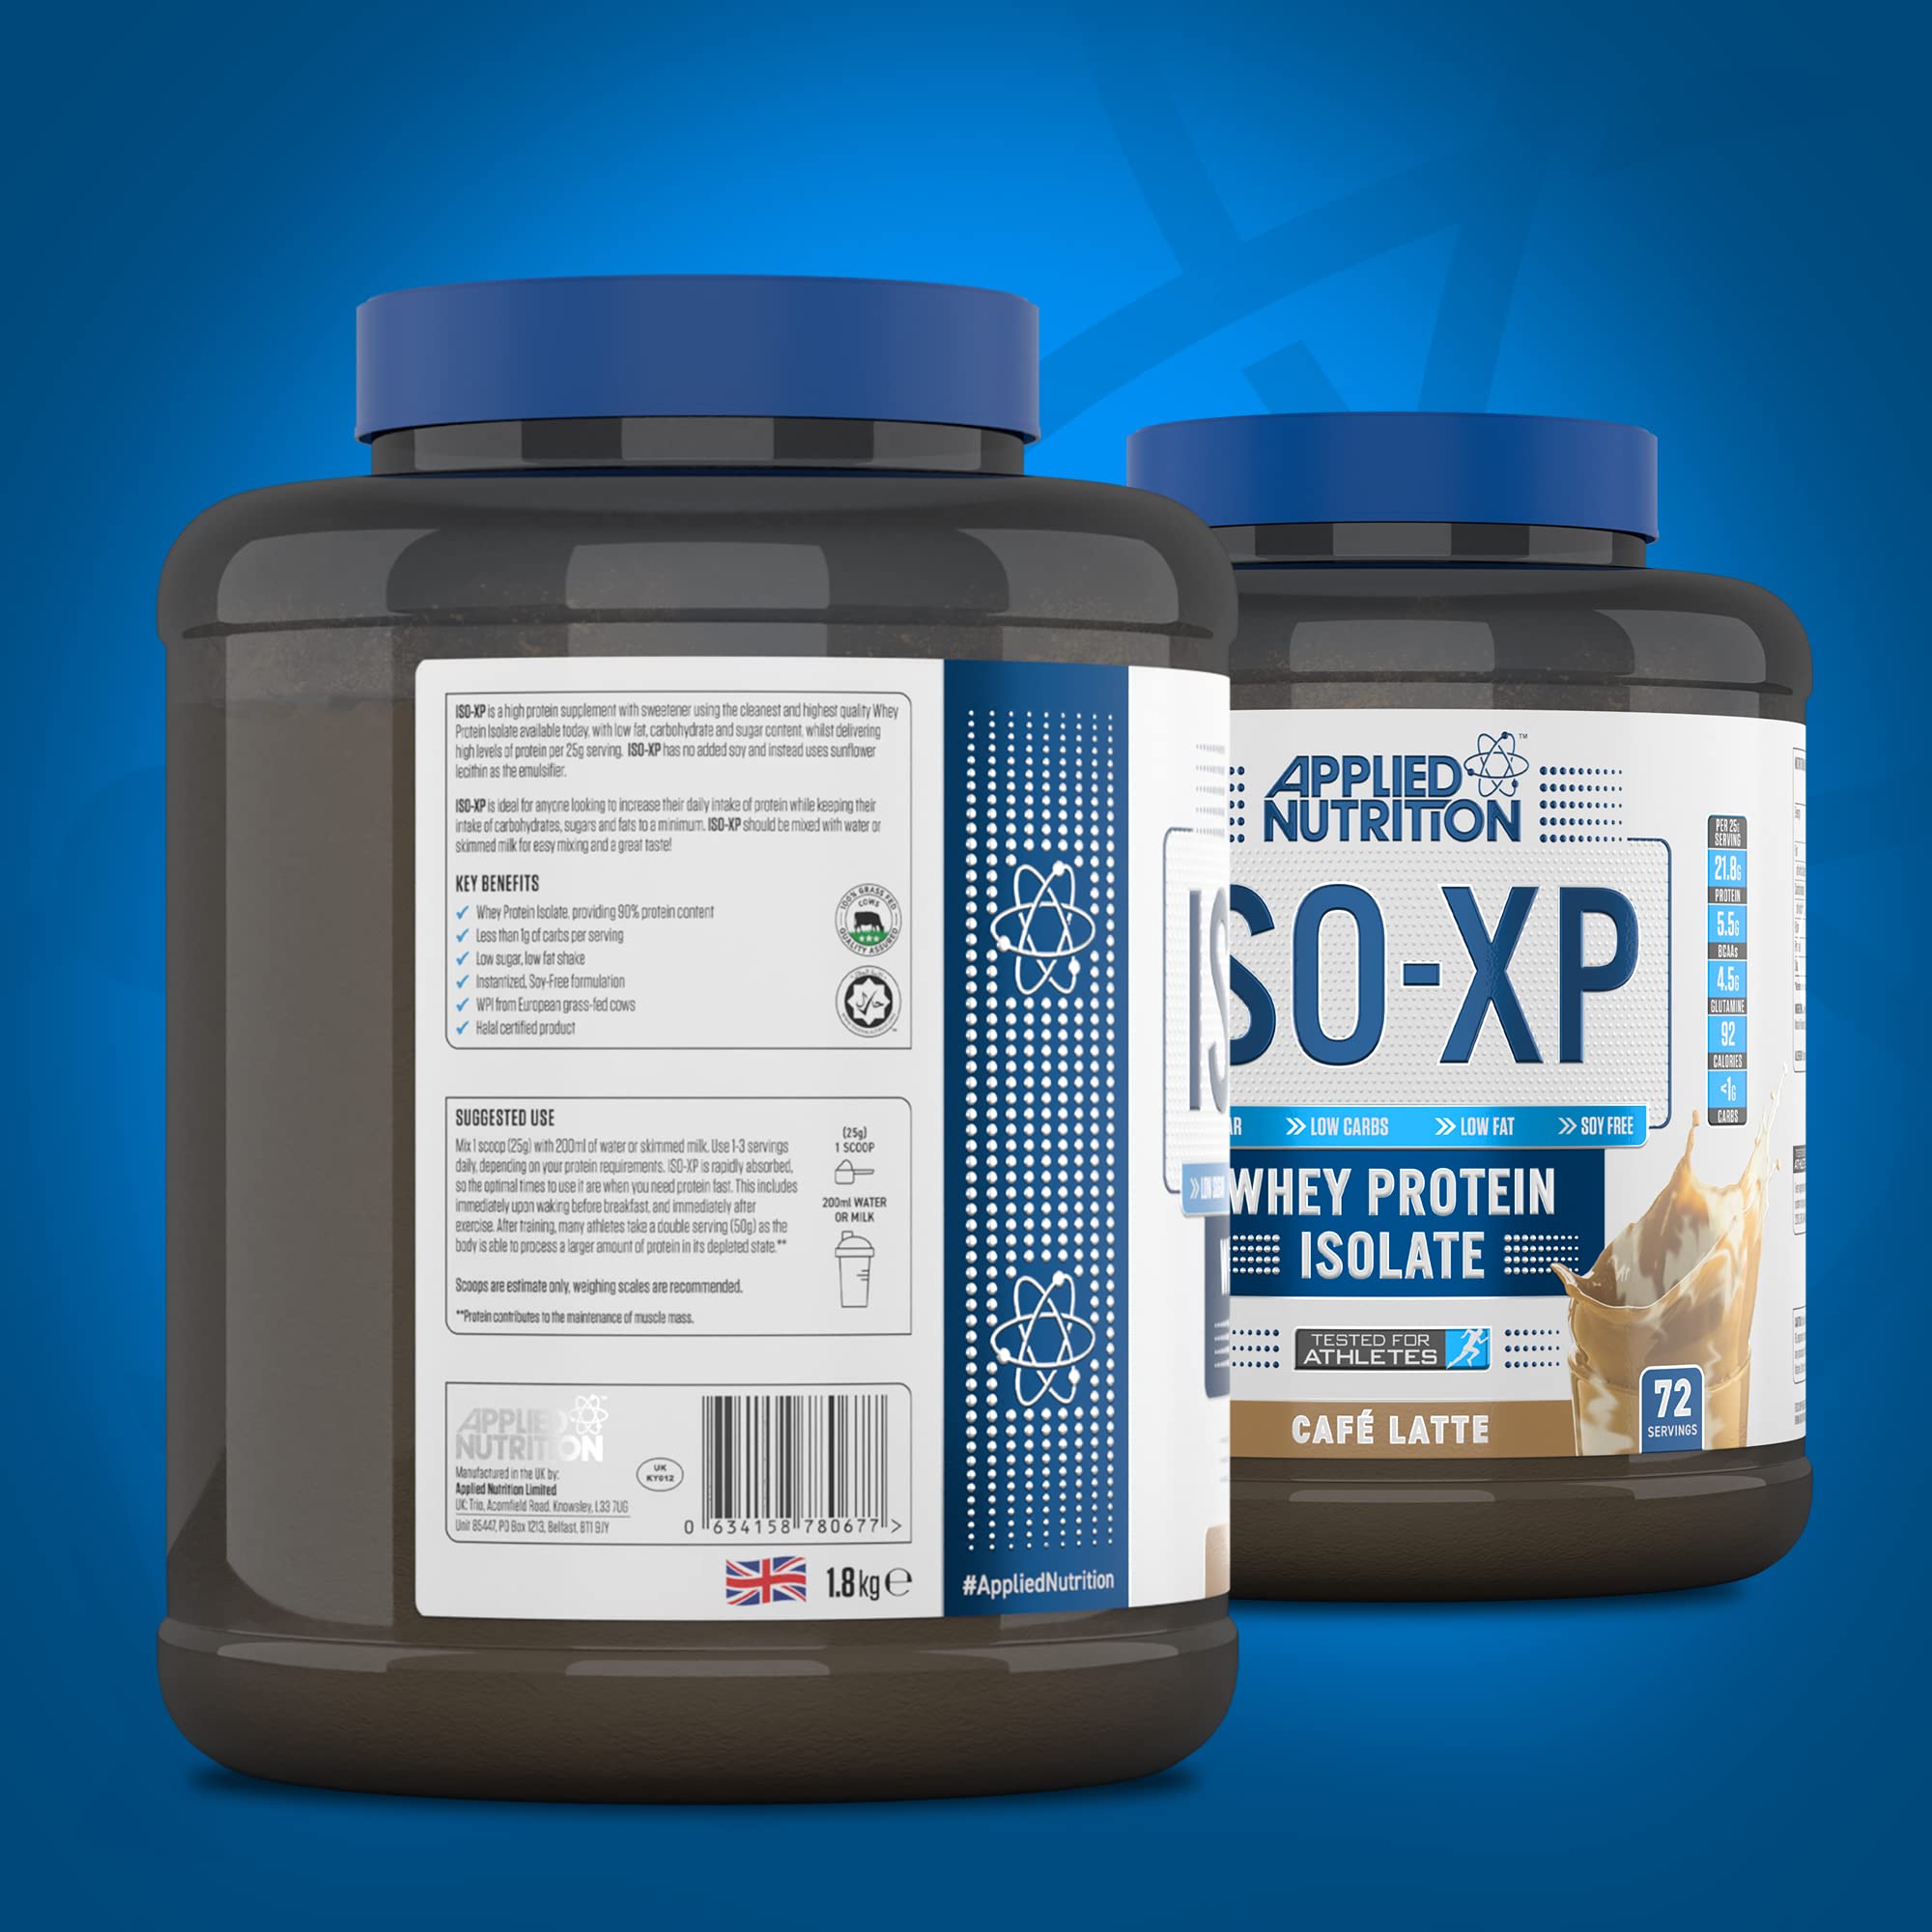 Applied Nutrition Iso-XP Molkeproteinisolate Isolate Eiweiß Protein